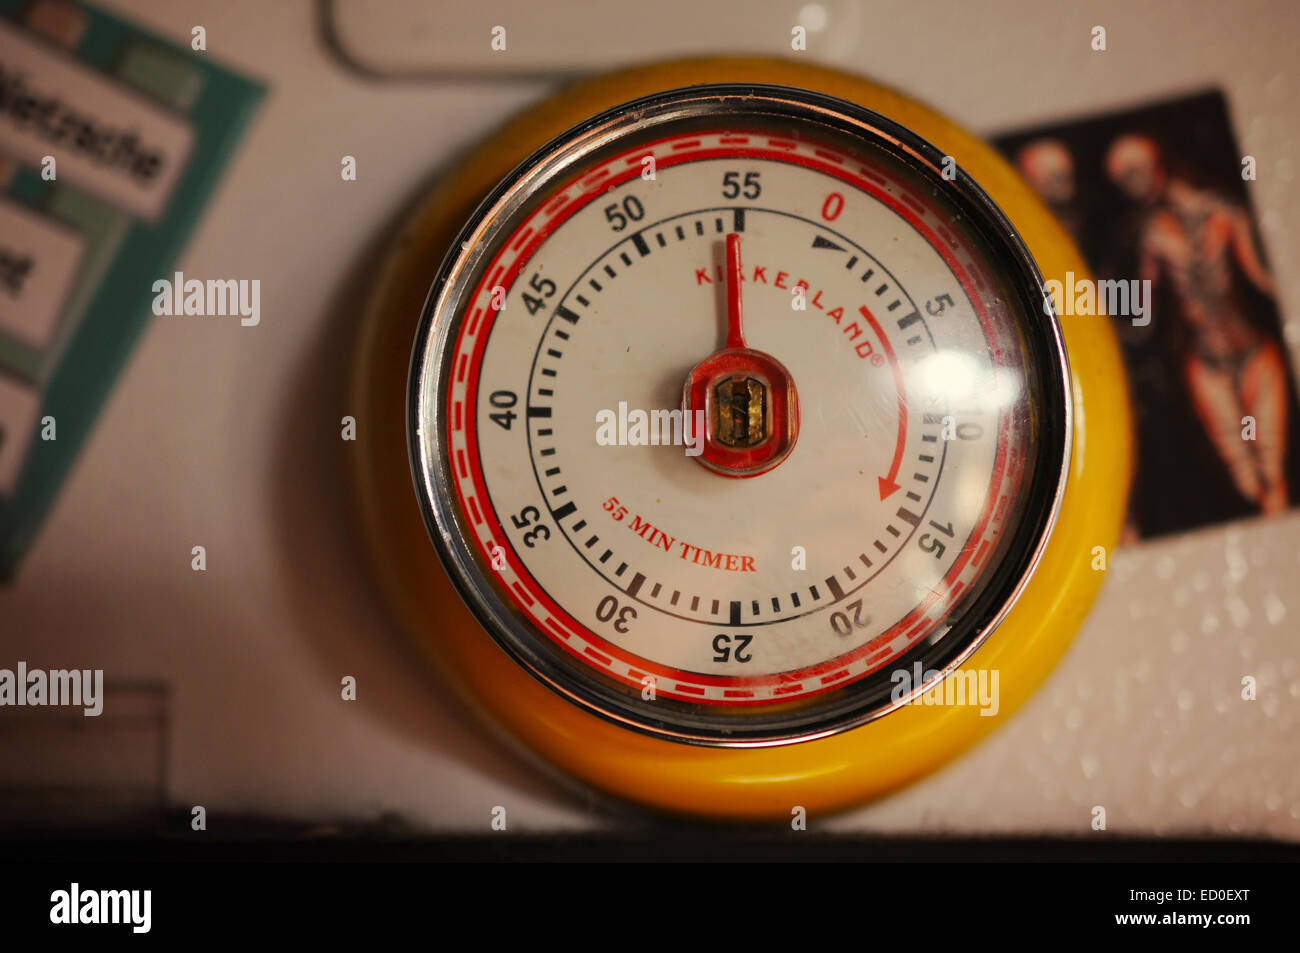 An old fashioned hour timer refrigerator magnet hanging on a refrigerator. Stock Photo